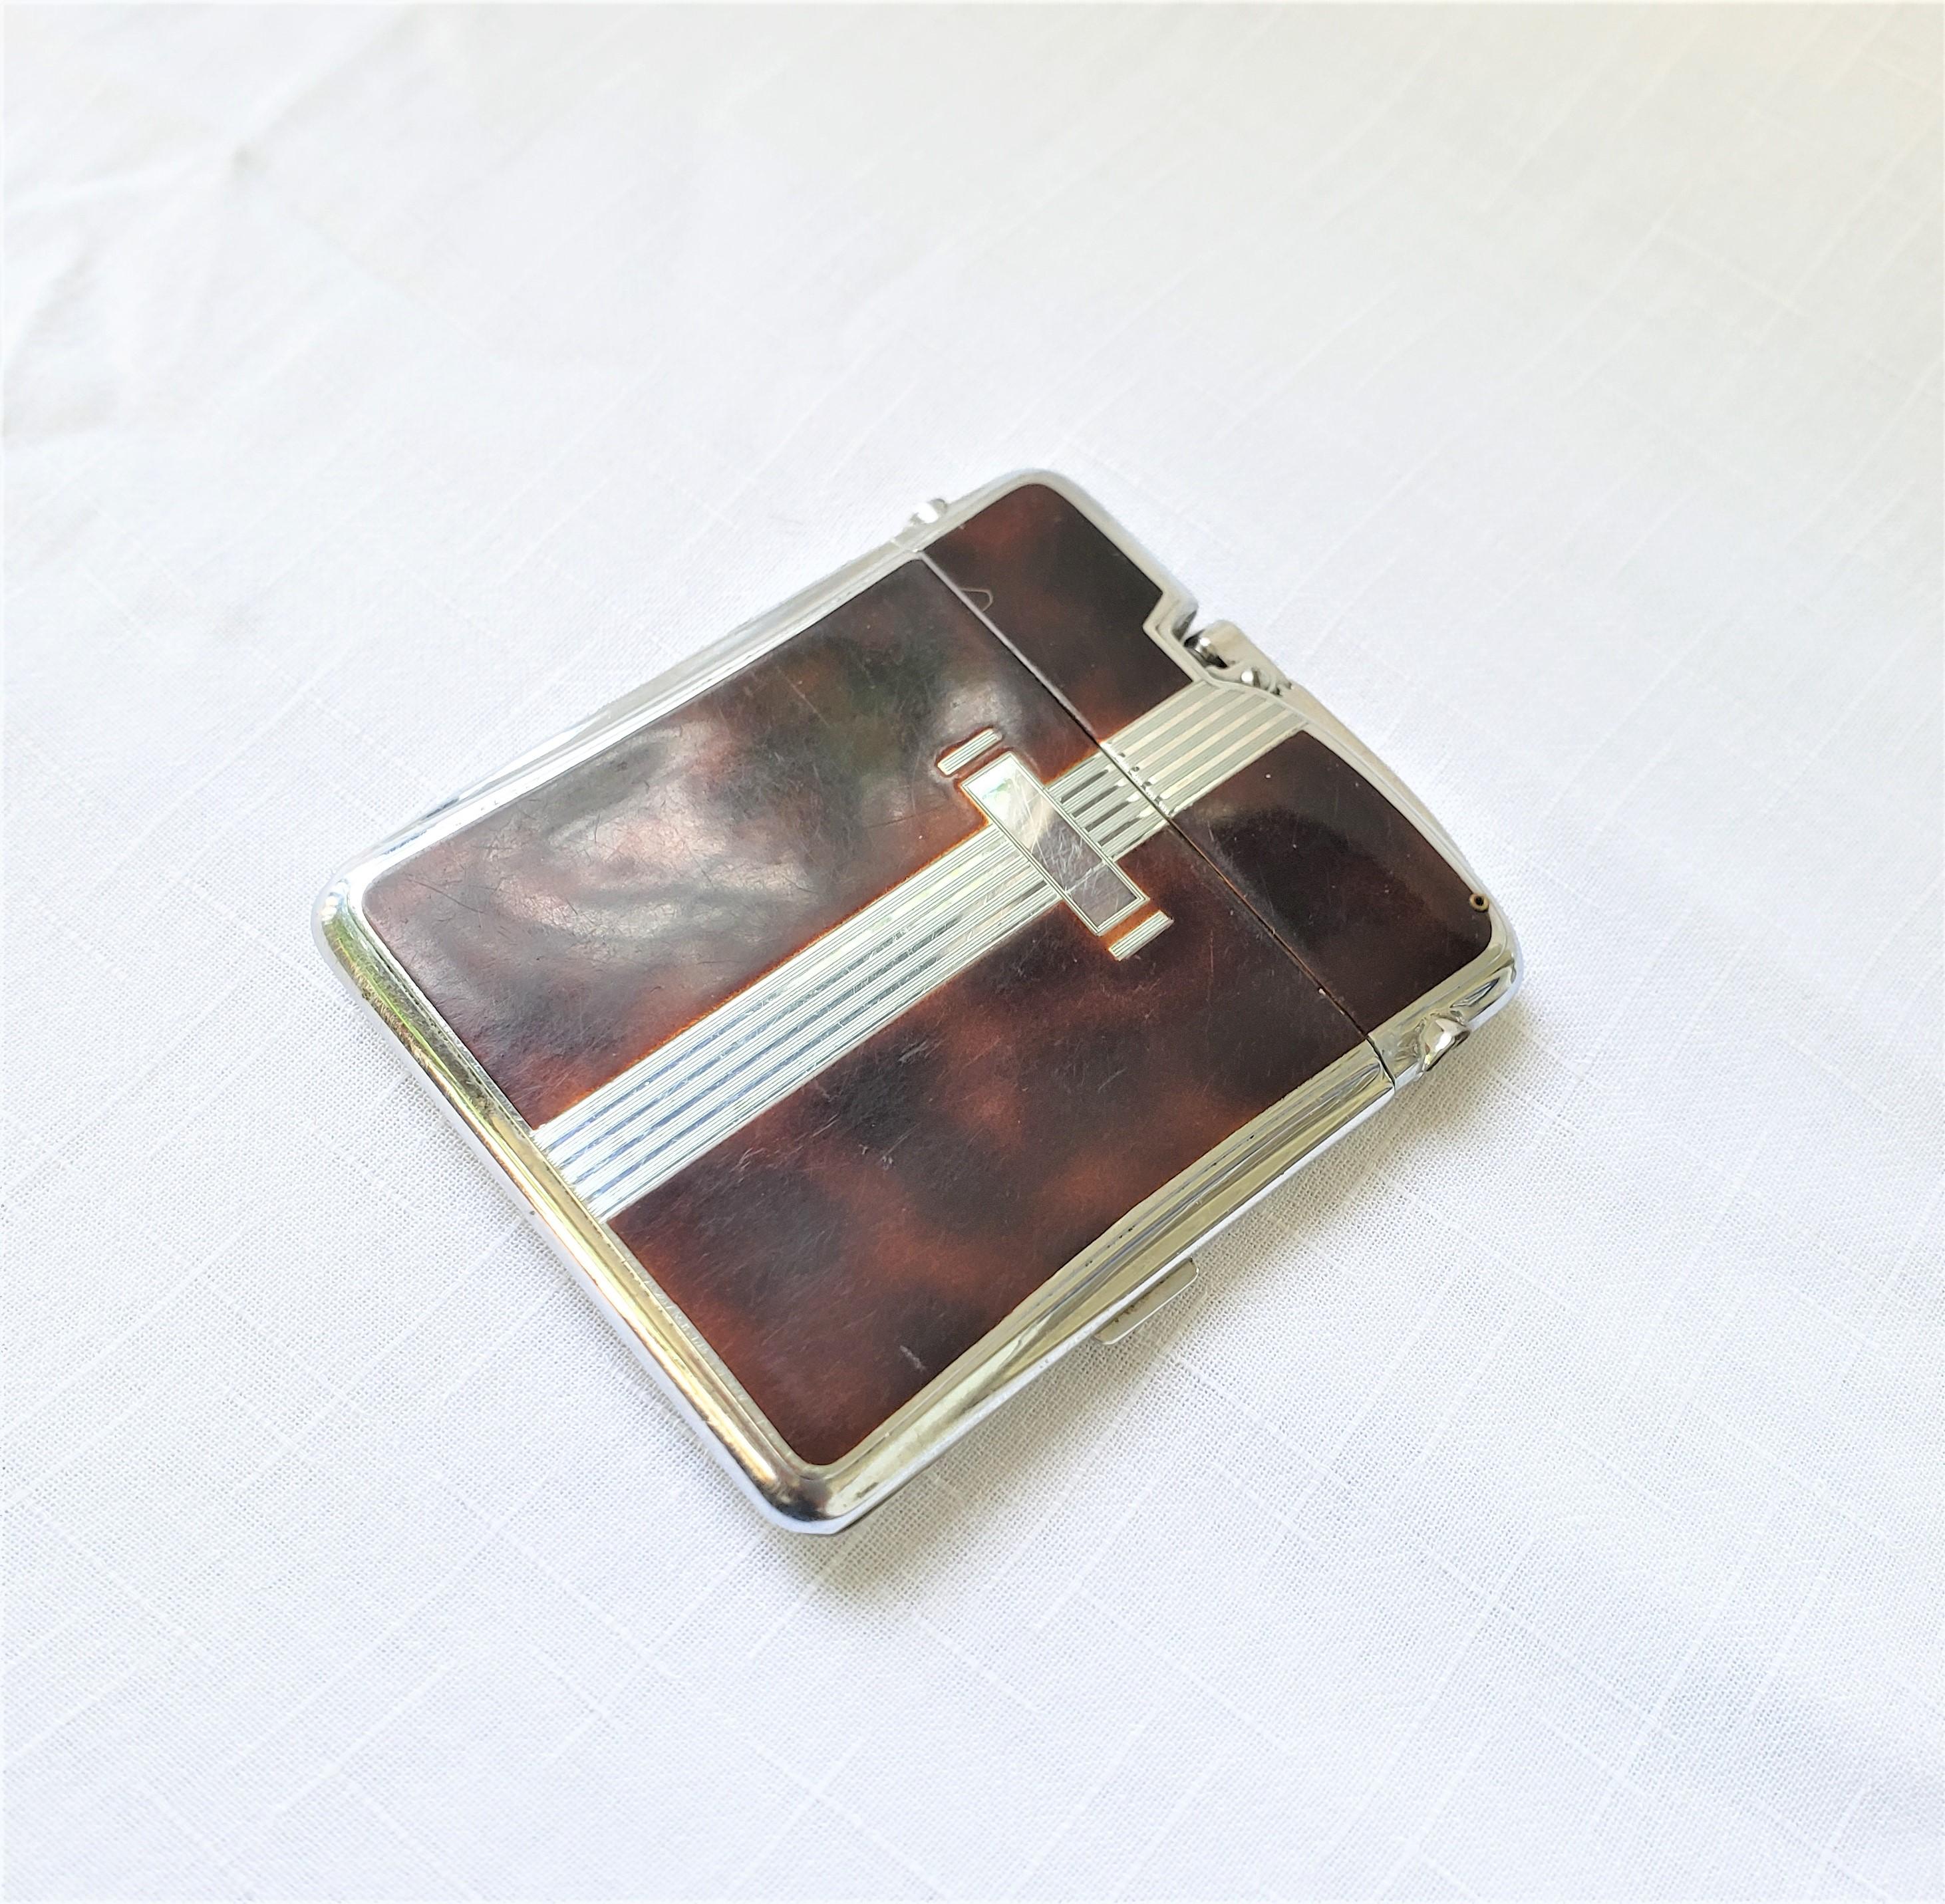 ronson cigarette case with built in lighter